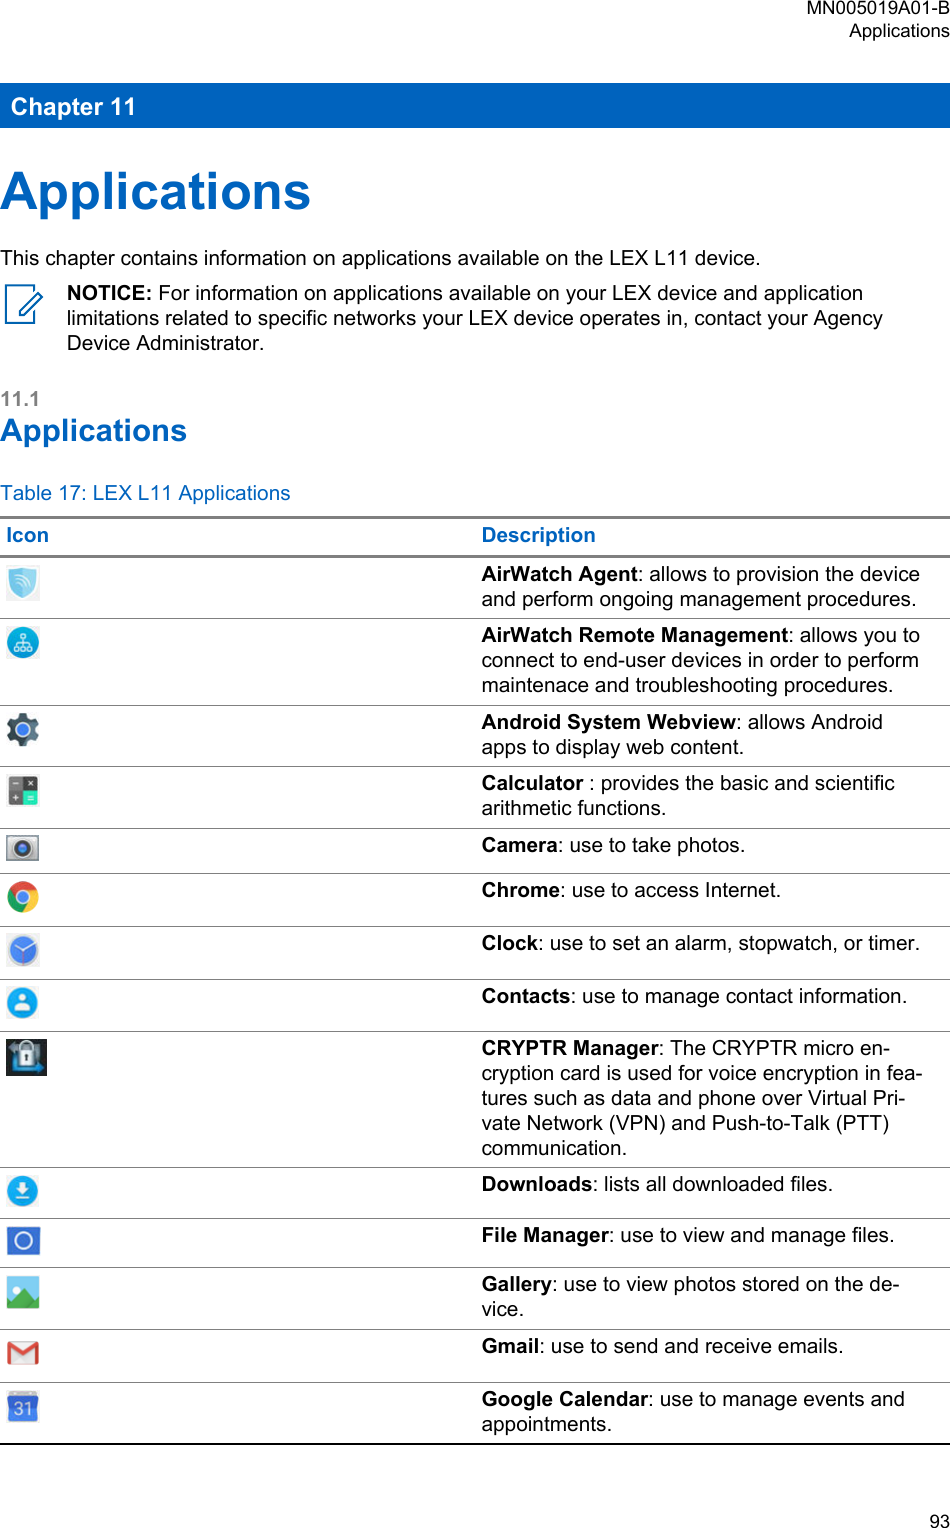 Chapter 11ApplicationsThis chapter contains information on applications available on the LEX L11 device.NOTICE: For information on applications available on your LEX device and applicationlimitations related to specific networks your LEX device operates in, contact your AgencyDevice Administrator.11.1ApplicationsTable 17: LEX L11 ApplicationsIcon DescriptionAirWatch Agent: allows to provision the deviceand perform ongoing management procedures.AirWatch Remote Management: allows you toconnect to end-user devices in order to performmaintenace and troubleshooting procedures.Android System Webview: allows Androidapps to display web content.Calculator : provides the basic and scientificarithmetic functions.Camera: use to take photos.Chrome: use to access Internet.Clock: use to set an alarm, stopwatch, or timer.Contacts: use to manage contact information.CRYPTR Manager: The CRYPTR micro en-cryption card is used for voice encryption in fea-tures such as data and phone over Virtual Pri-vate Network (VPN) and Push-to-Talk (PTT)communication.Downloads: lists all downloaded files.File Manager: use to view and manage files.Gallery: use to view photos stored on the de-vice.Gmail: use to send and receive emails.Google Calendar: use to manage events andappointments.MN005019A01-BApplications  93